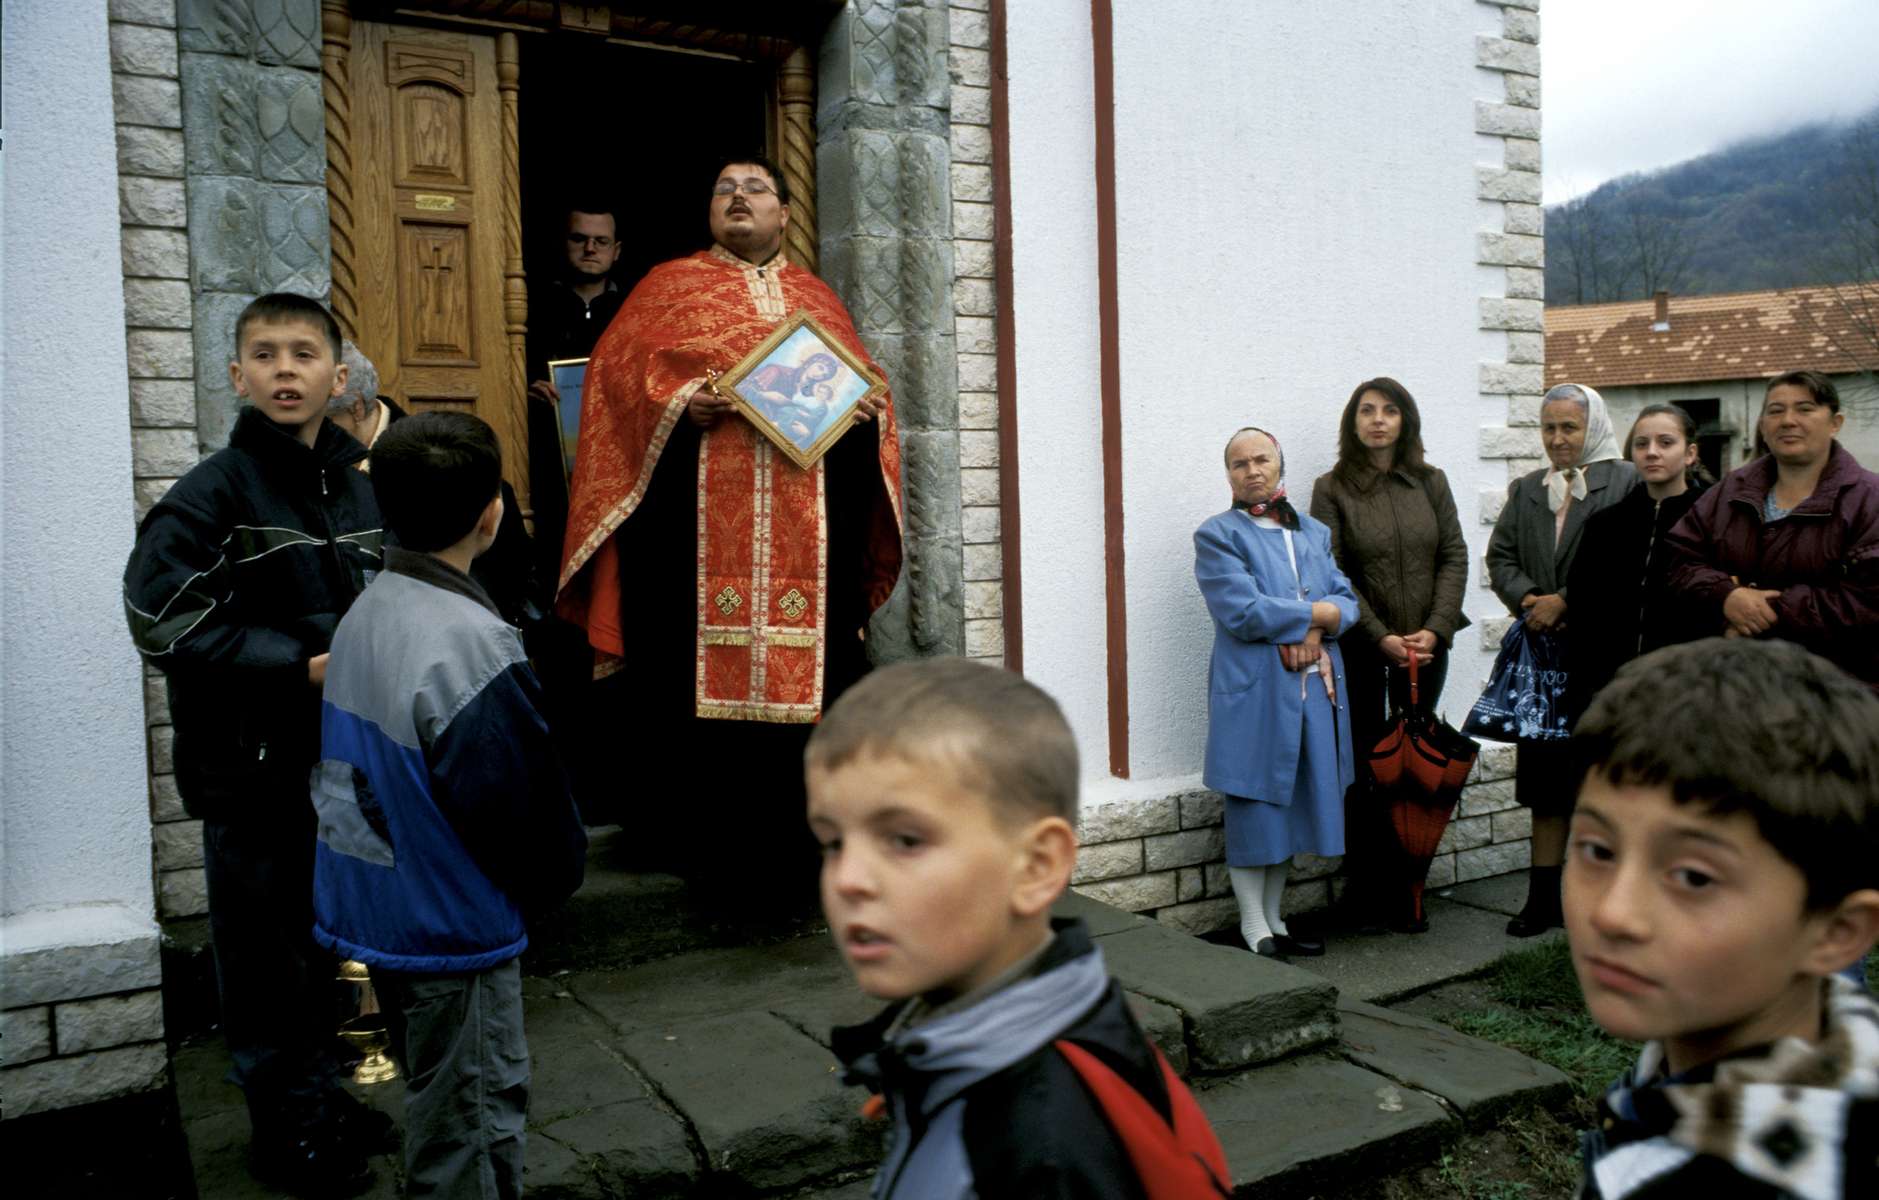 A Serb Orthodox priest holds an icon being auctioned to parishioners, who pay to carry the icons in a small procession that circles the church three times on Orthodox Easter Sunday. The church was damaged by extremist mujahideen who came to fight in Bosnia during the war, but was restored in recent years.